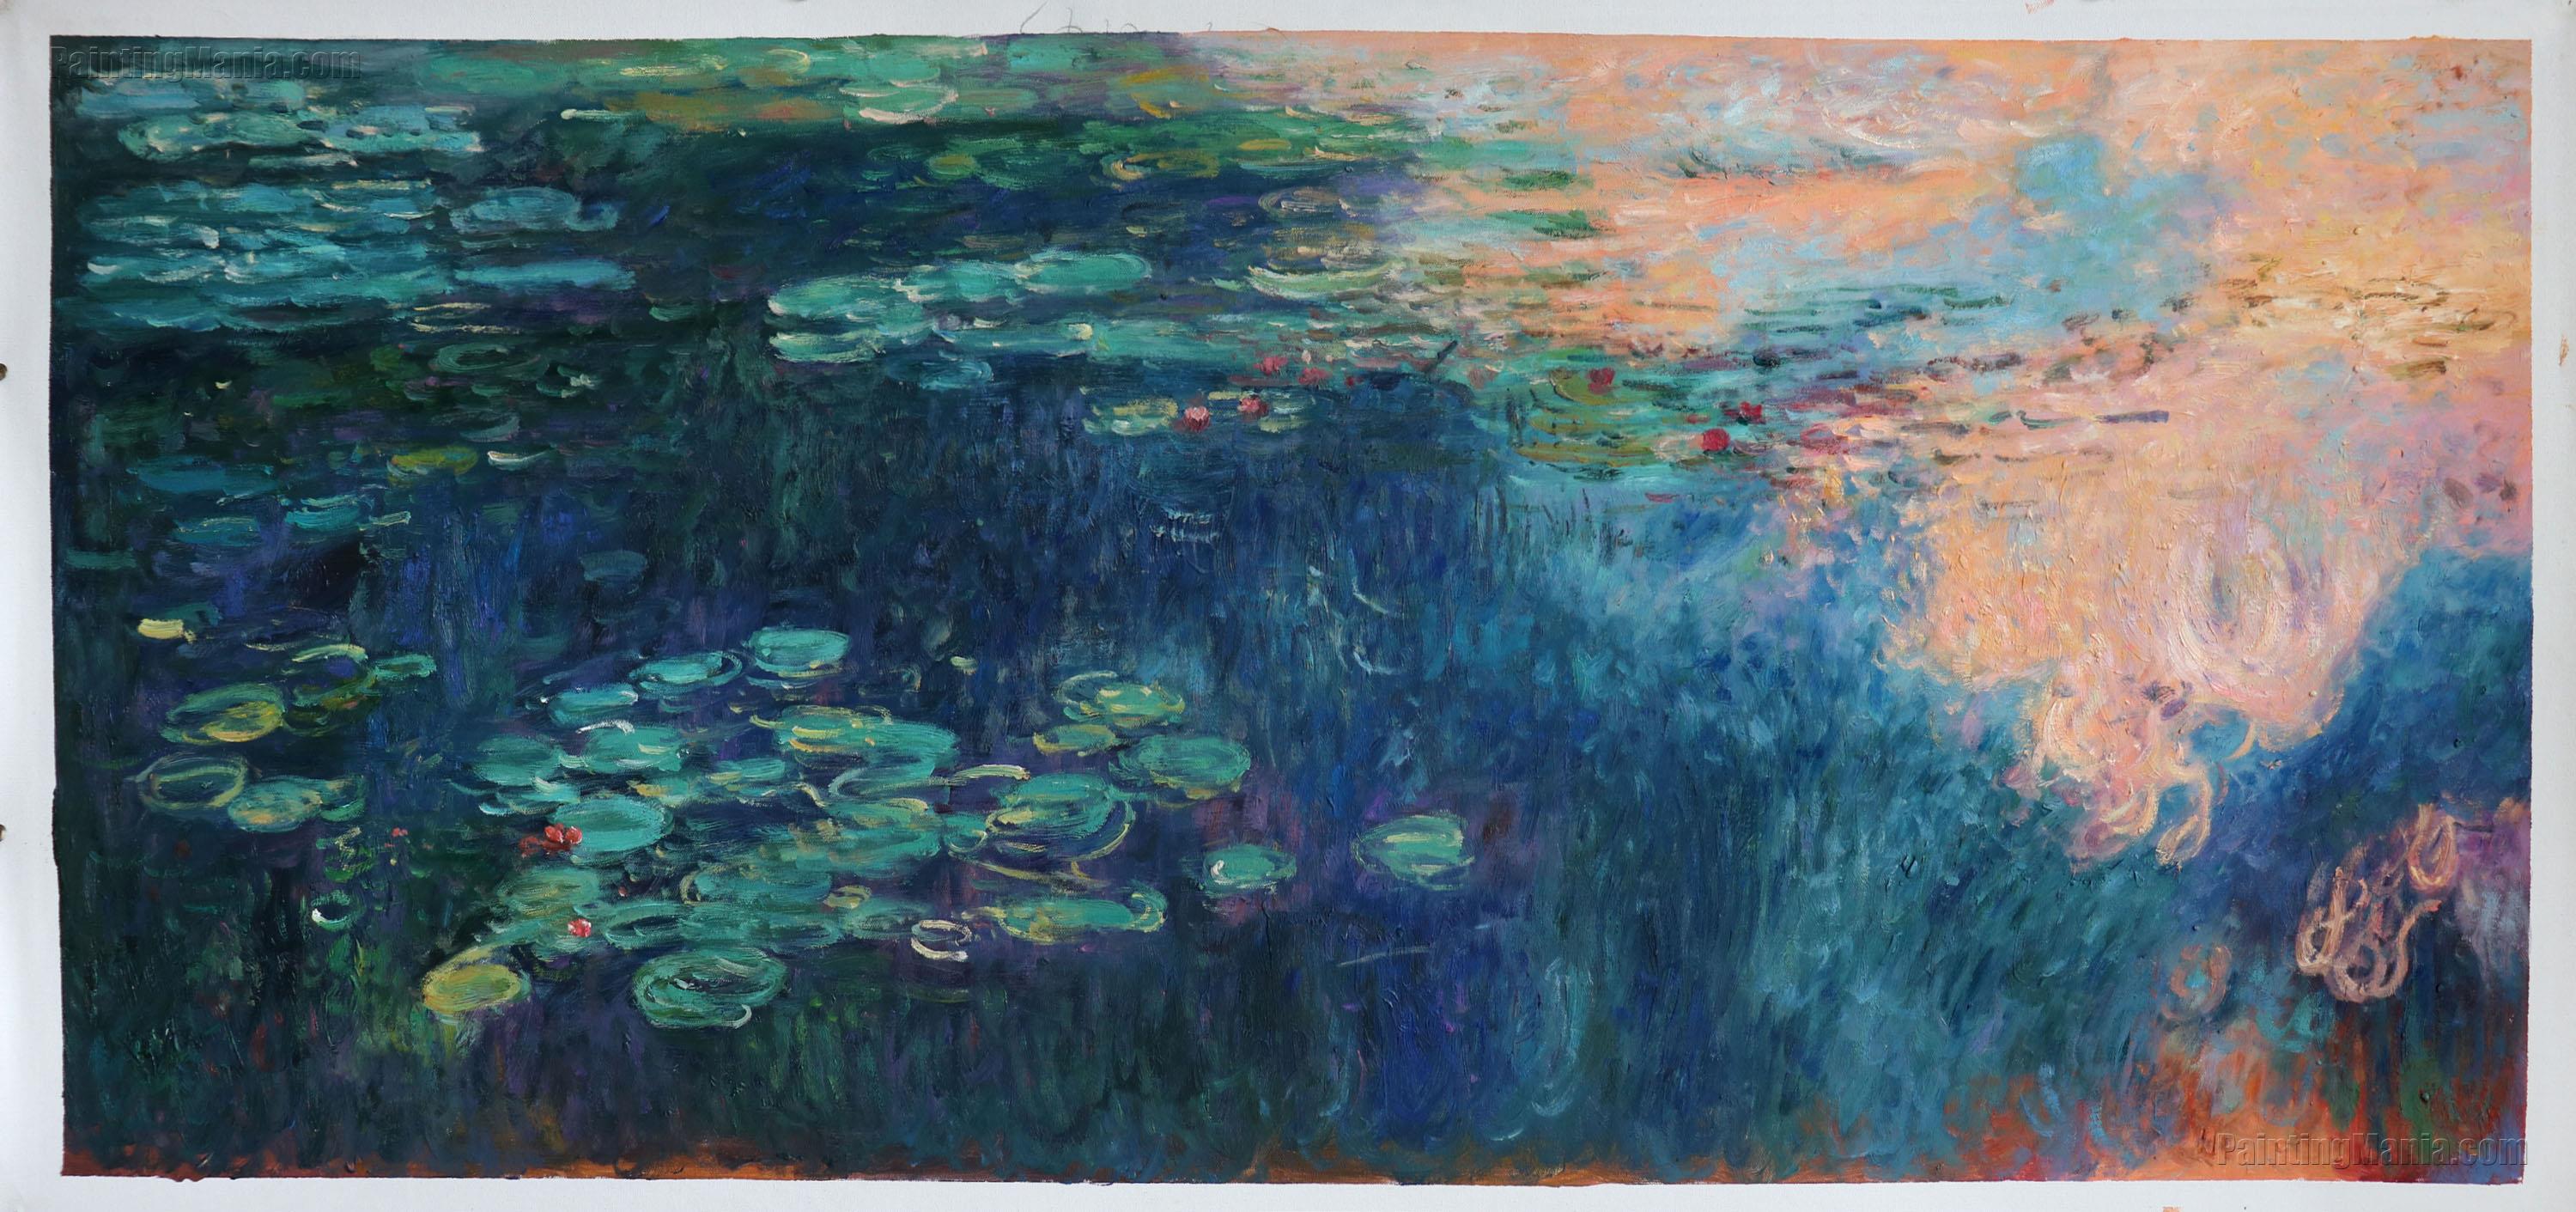 Reflections of Clouds on the Water-Lily Pond (triptych, left panel)